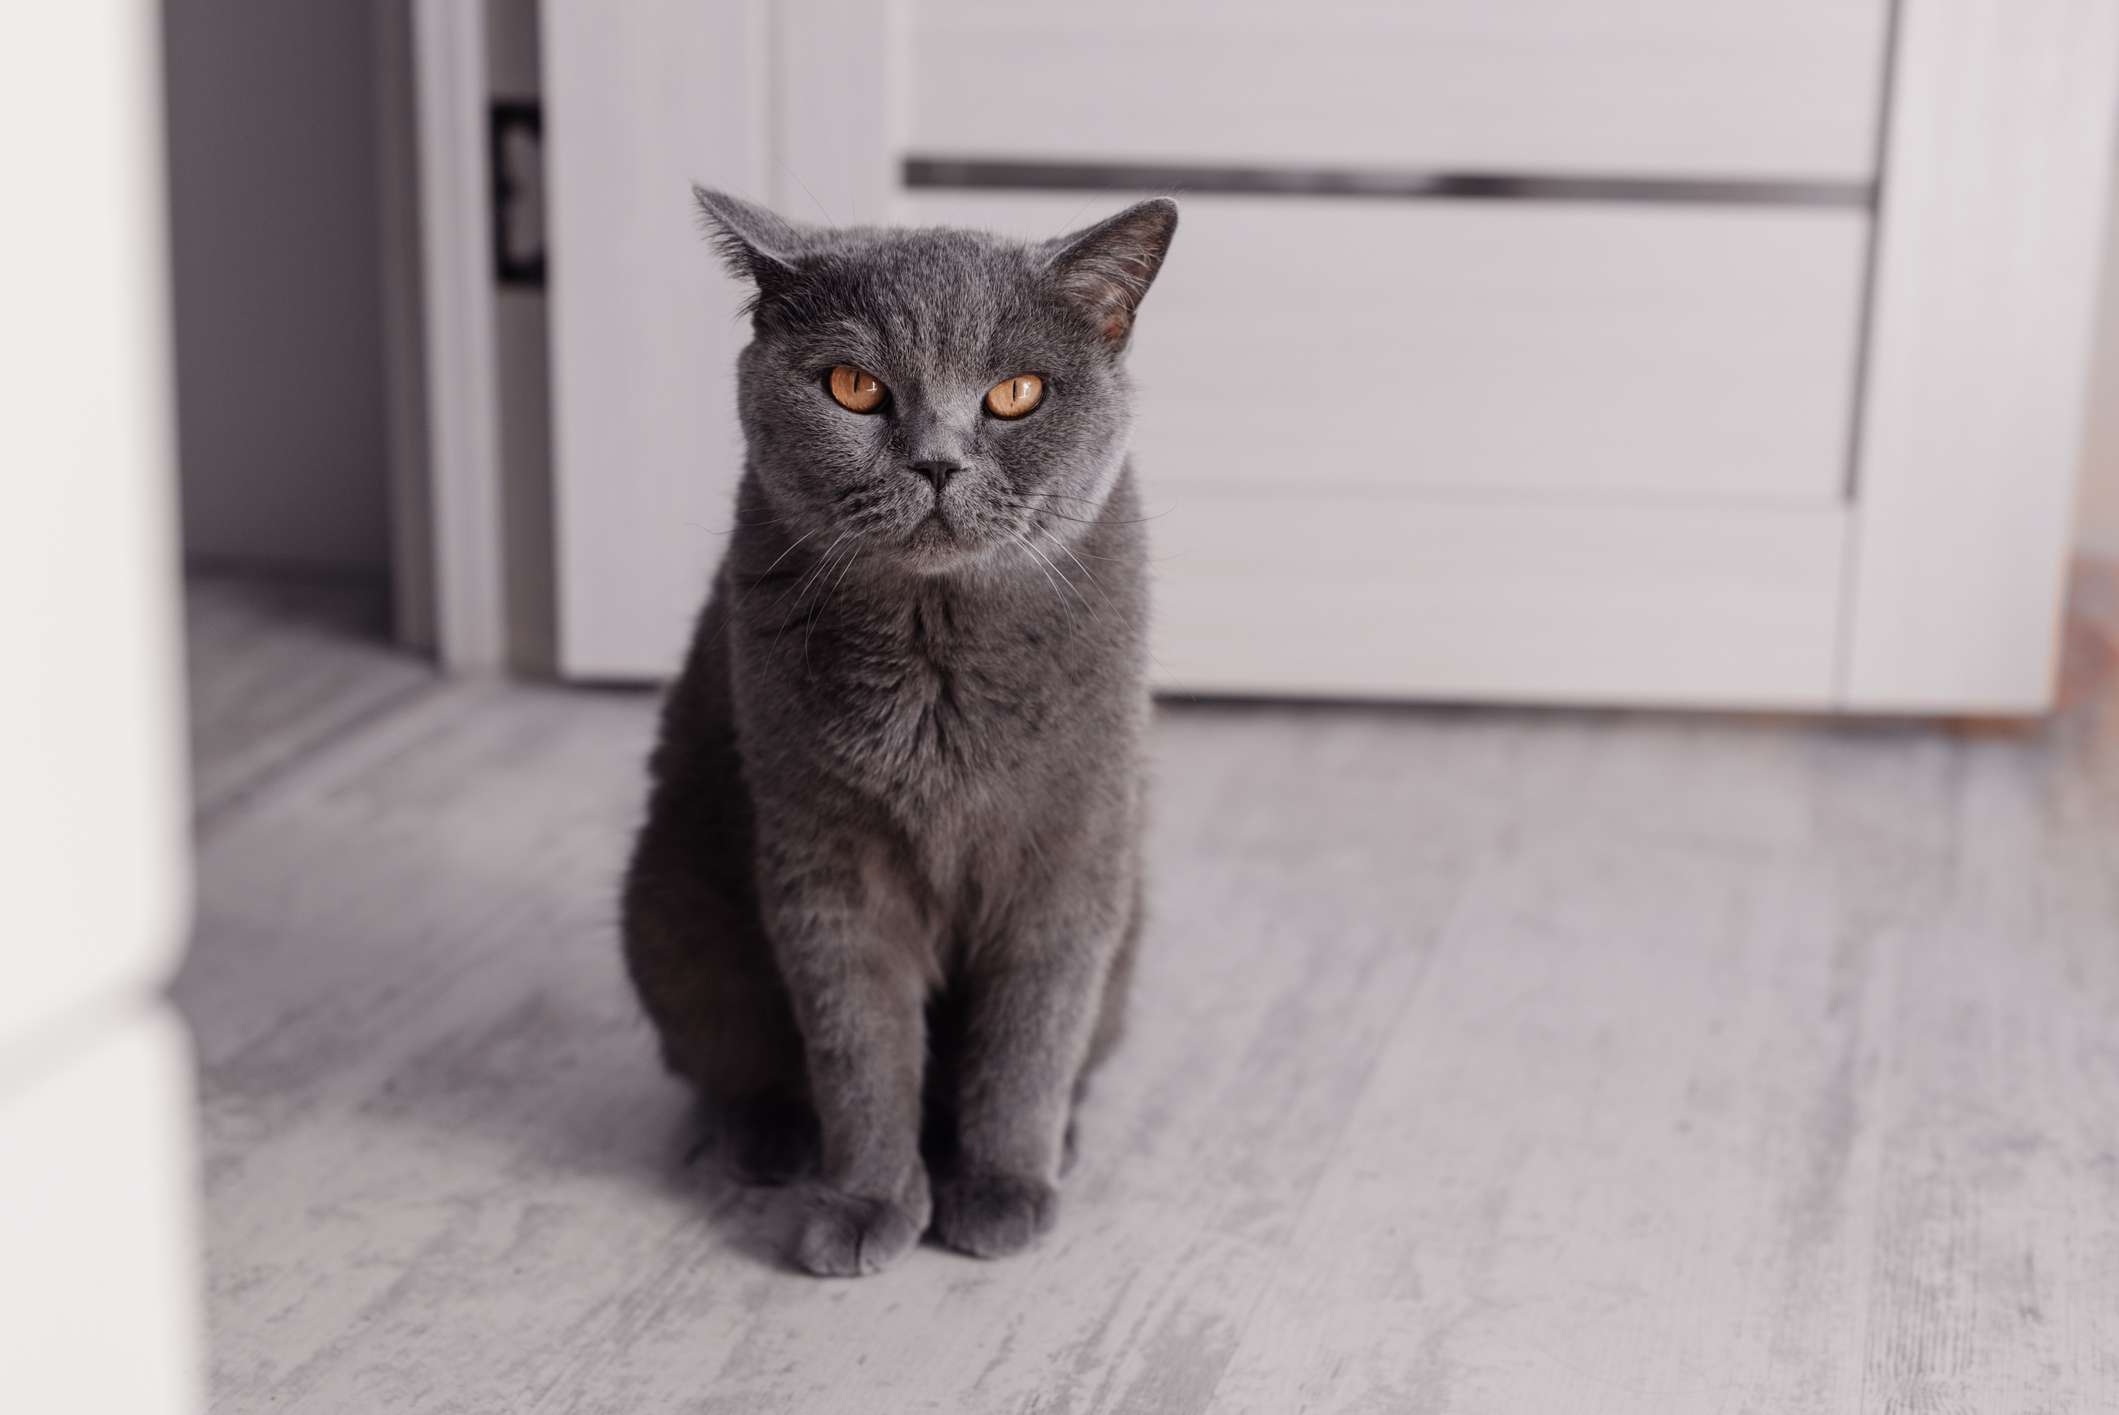 A gray British Shorthair cat sitting upright on the floor and looking at the camera.